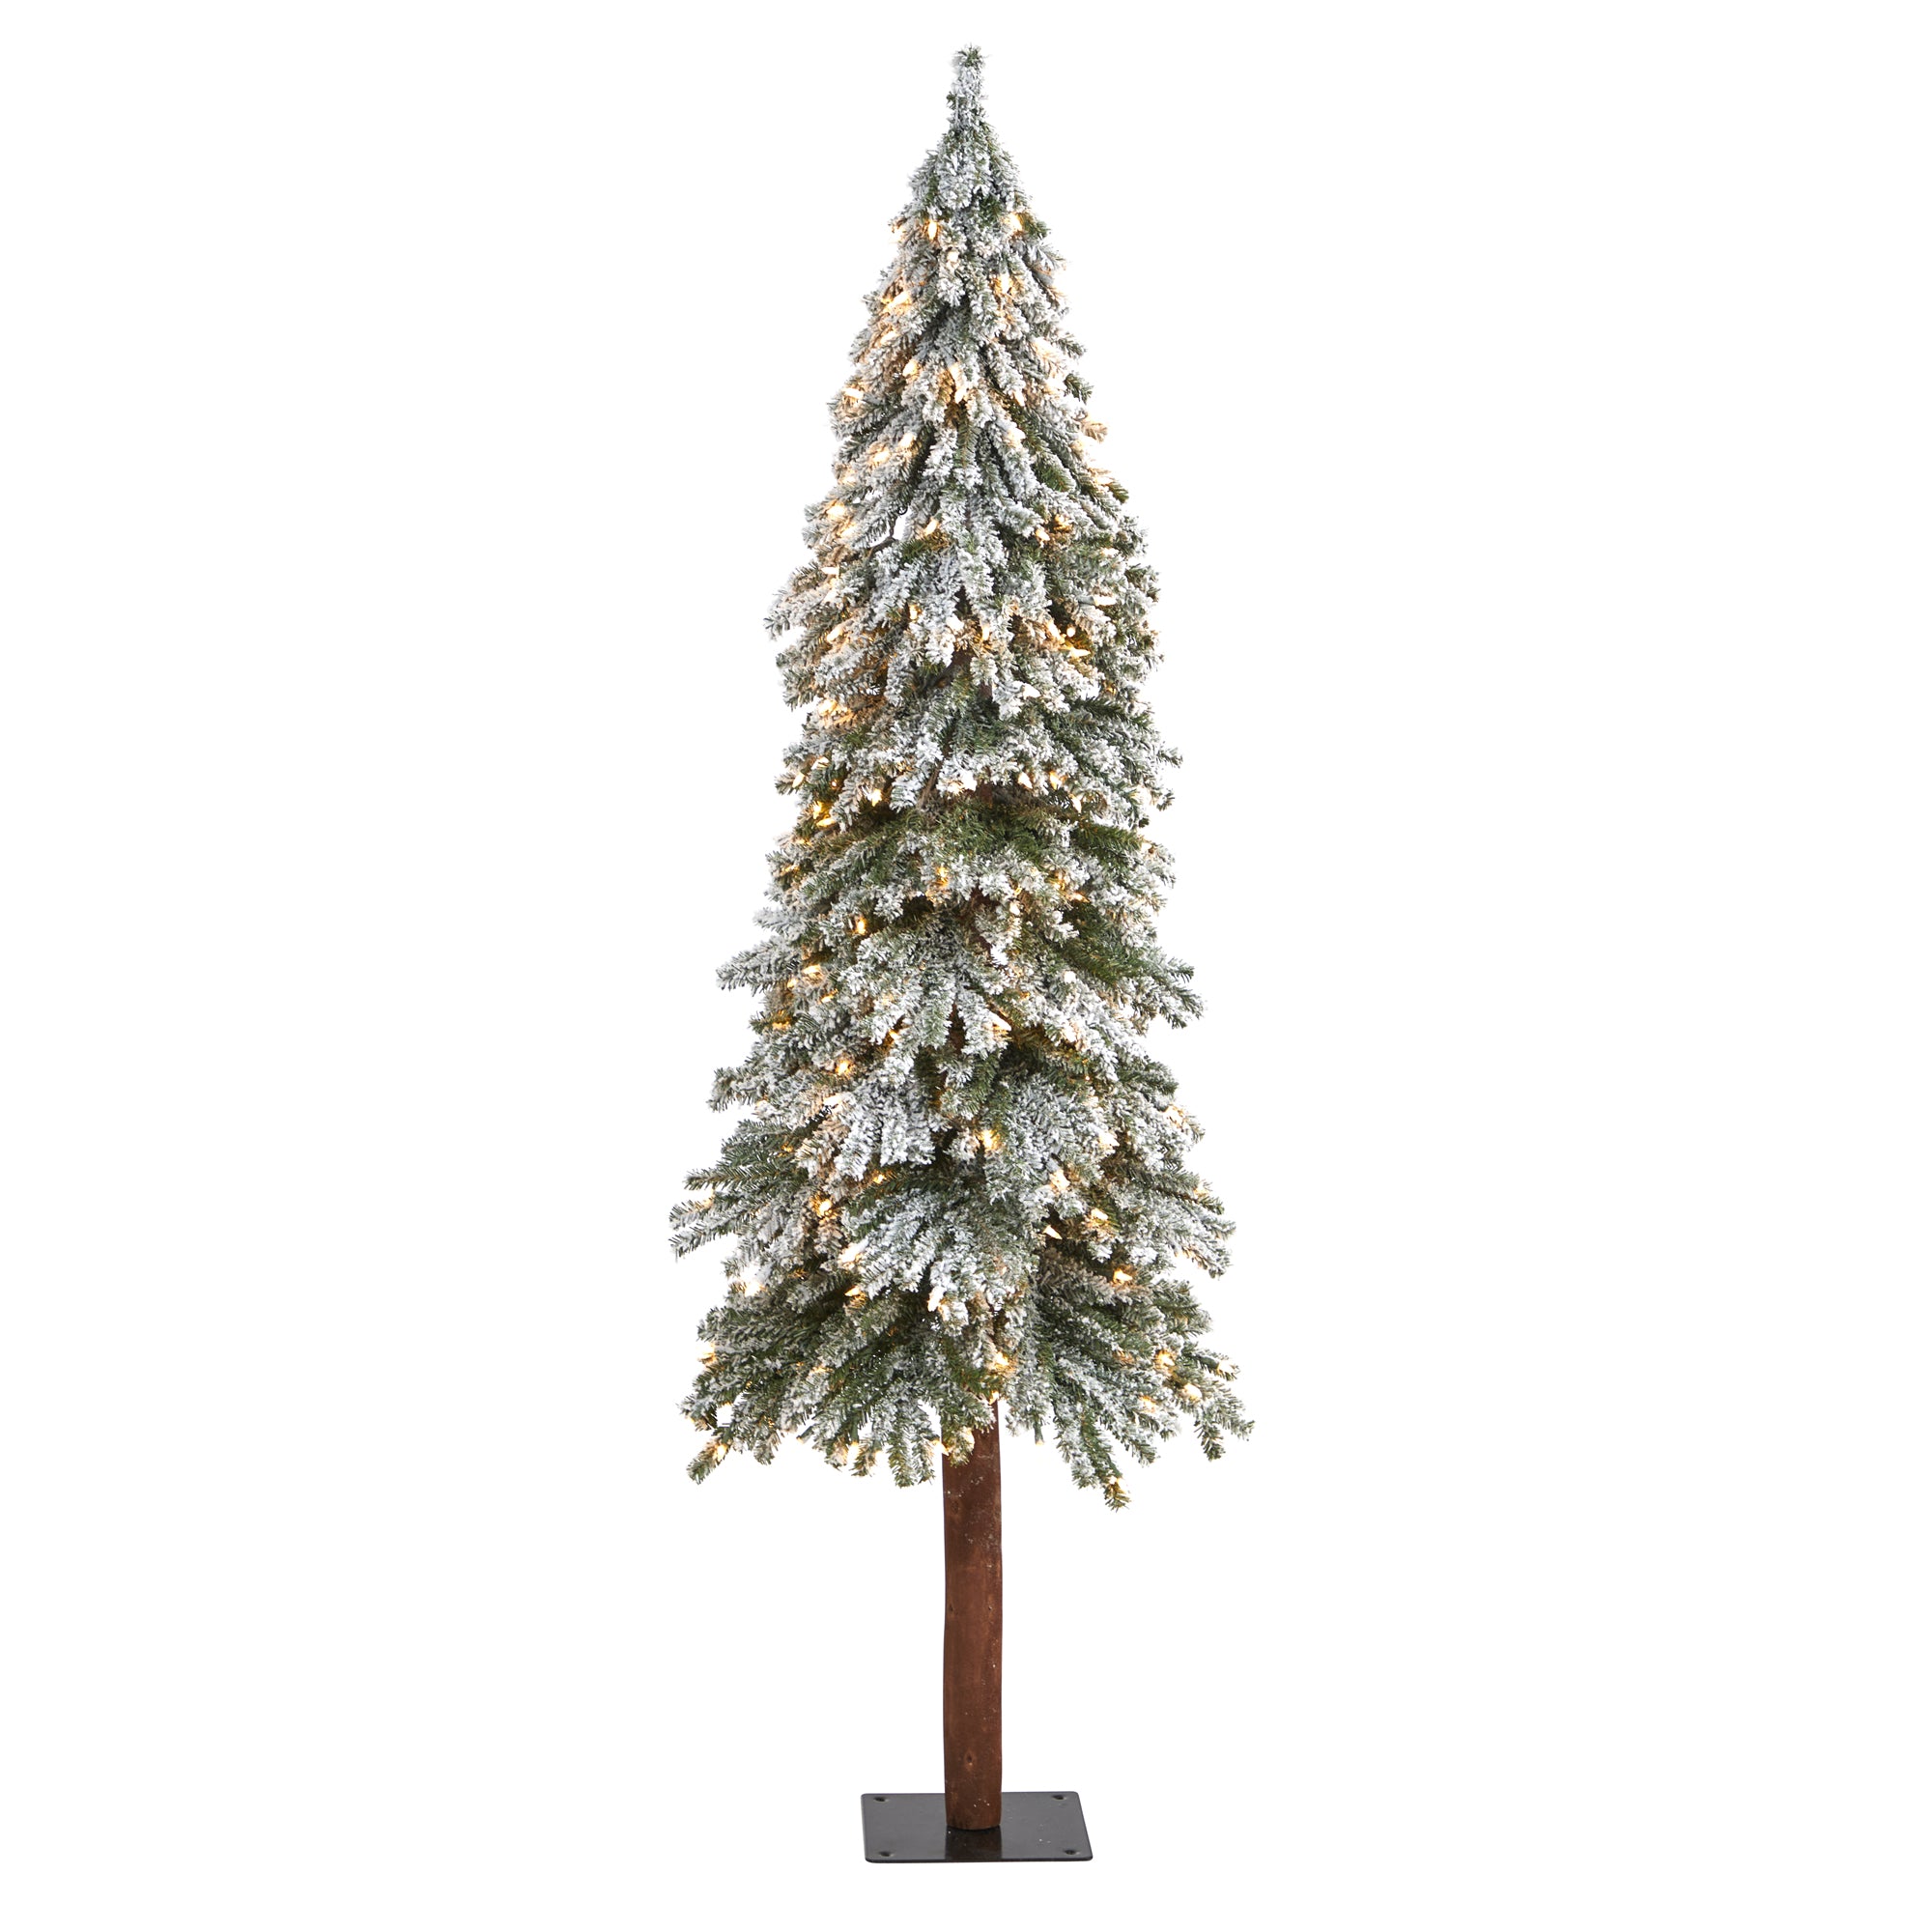 50"� Frosted Swiss Pine Artificial Christmas Tree with 100 Clear LED Lights and Berries in White Planter